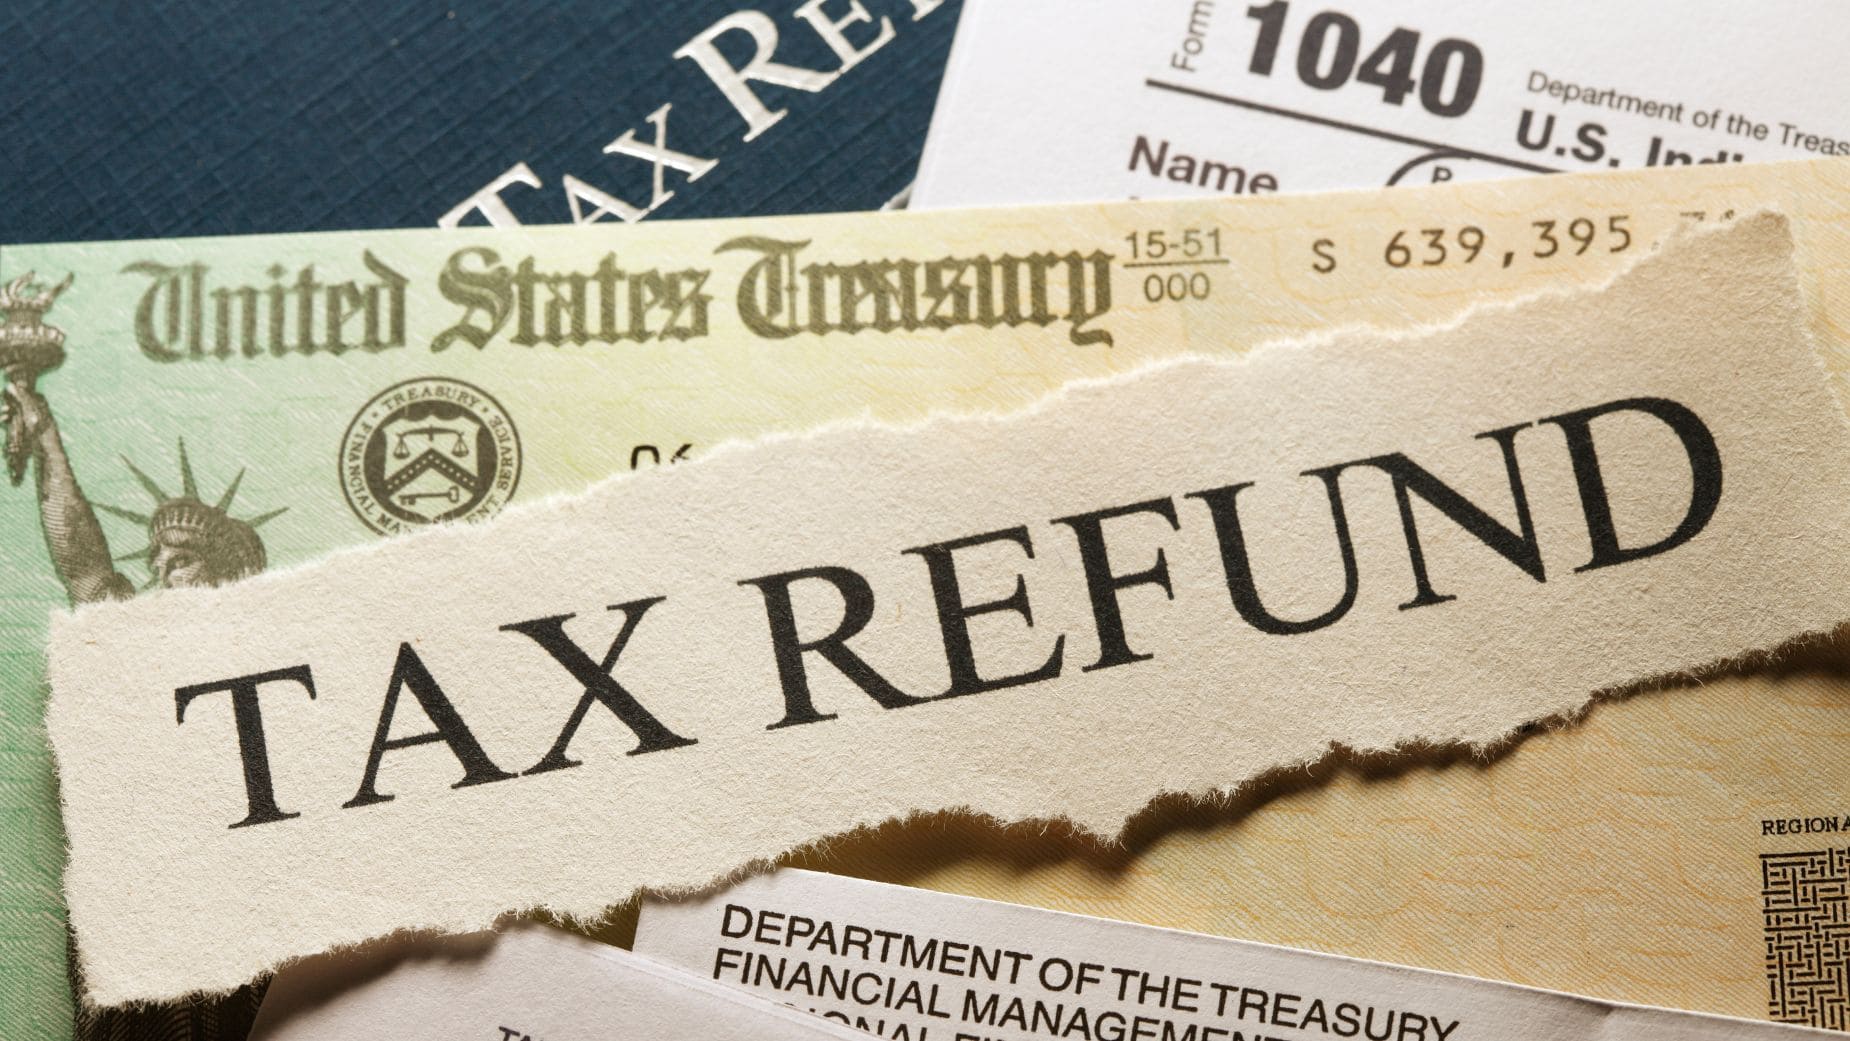 You still have time to apply for a 2020 Tax Refund to the IRS